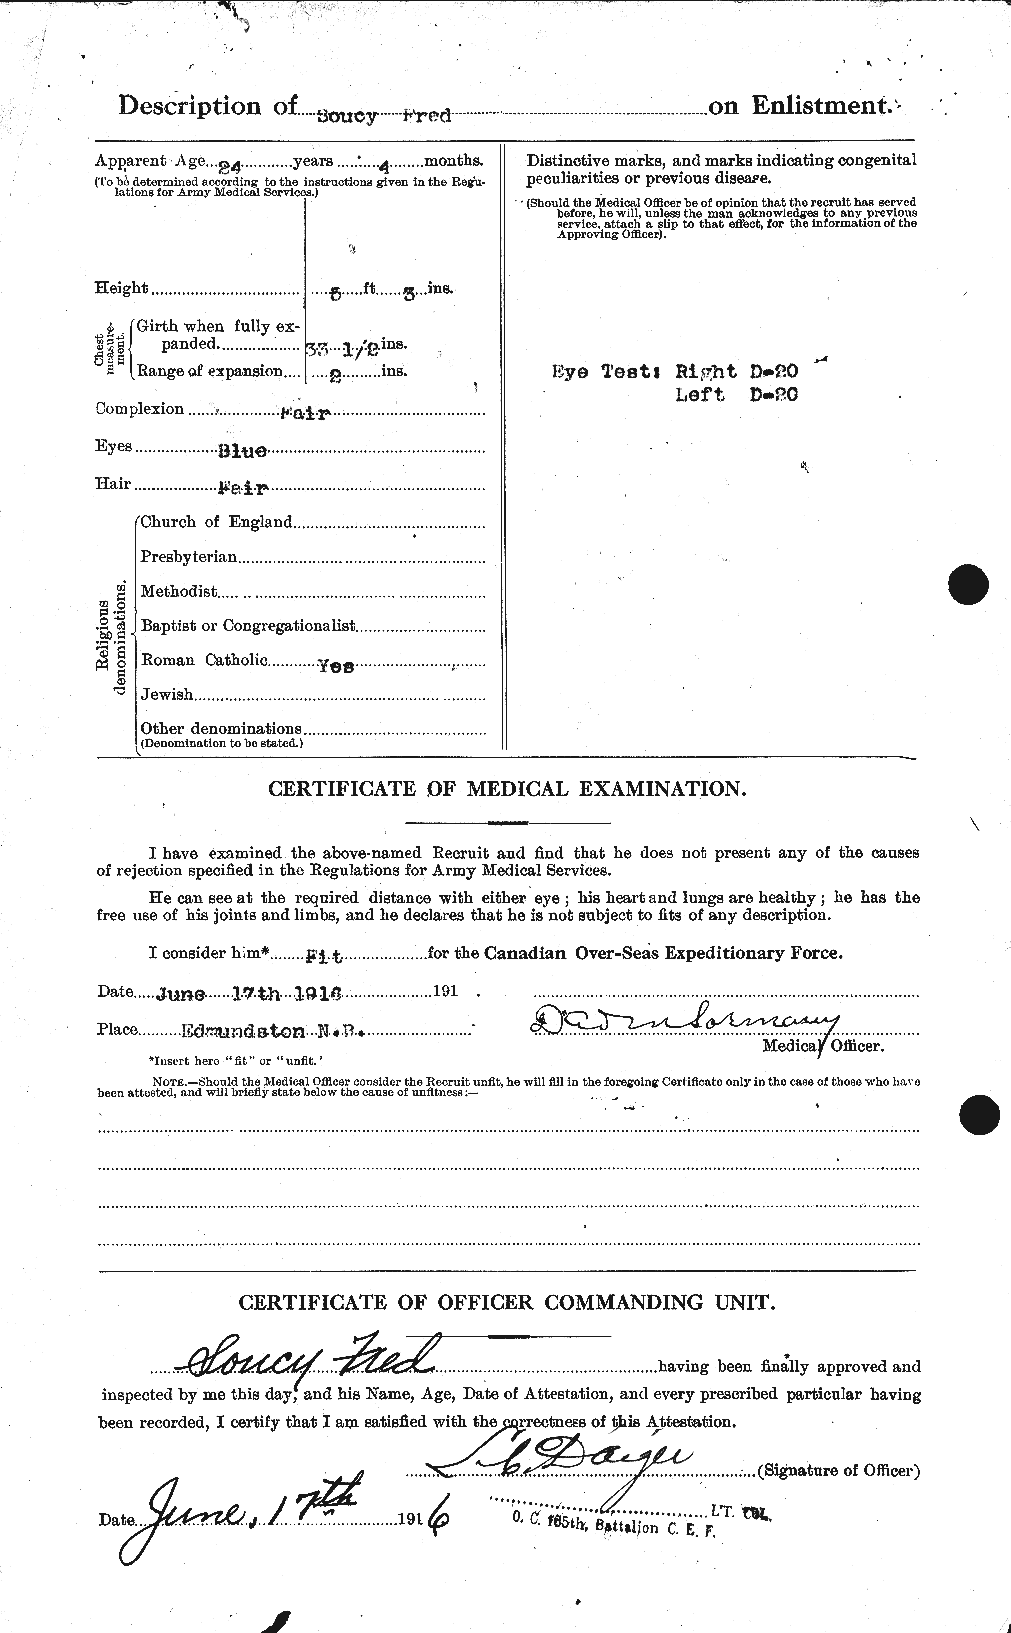 Personnel Records of the First World War - CEF 109566b